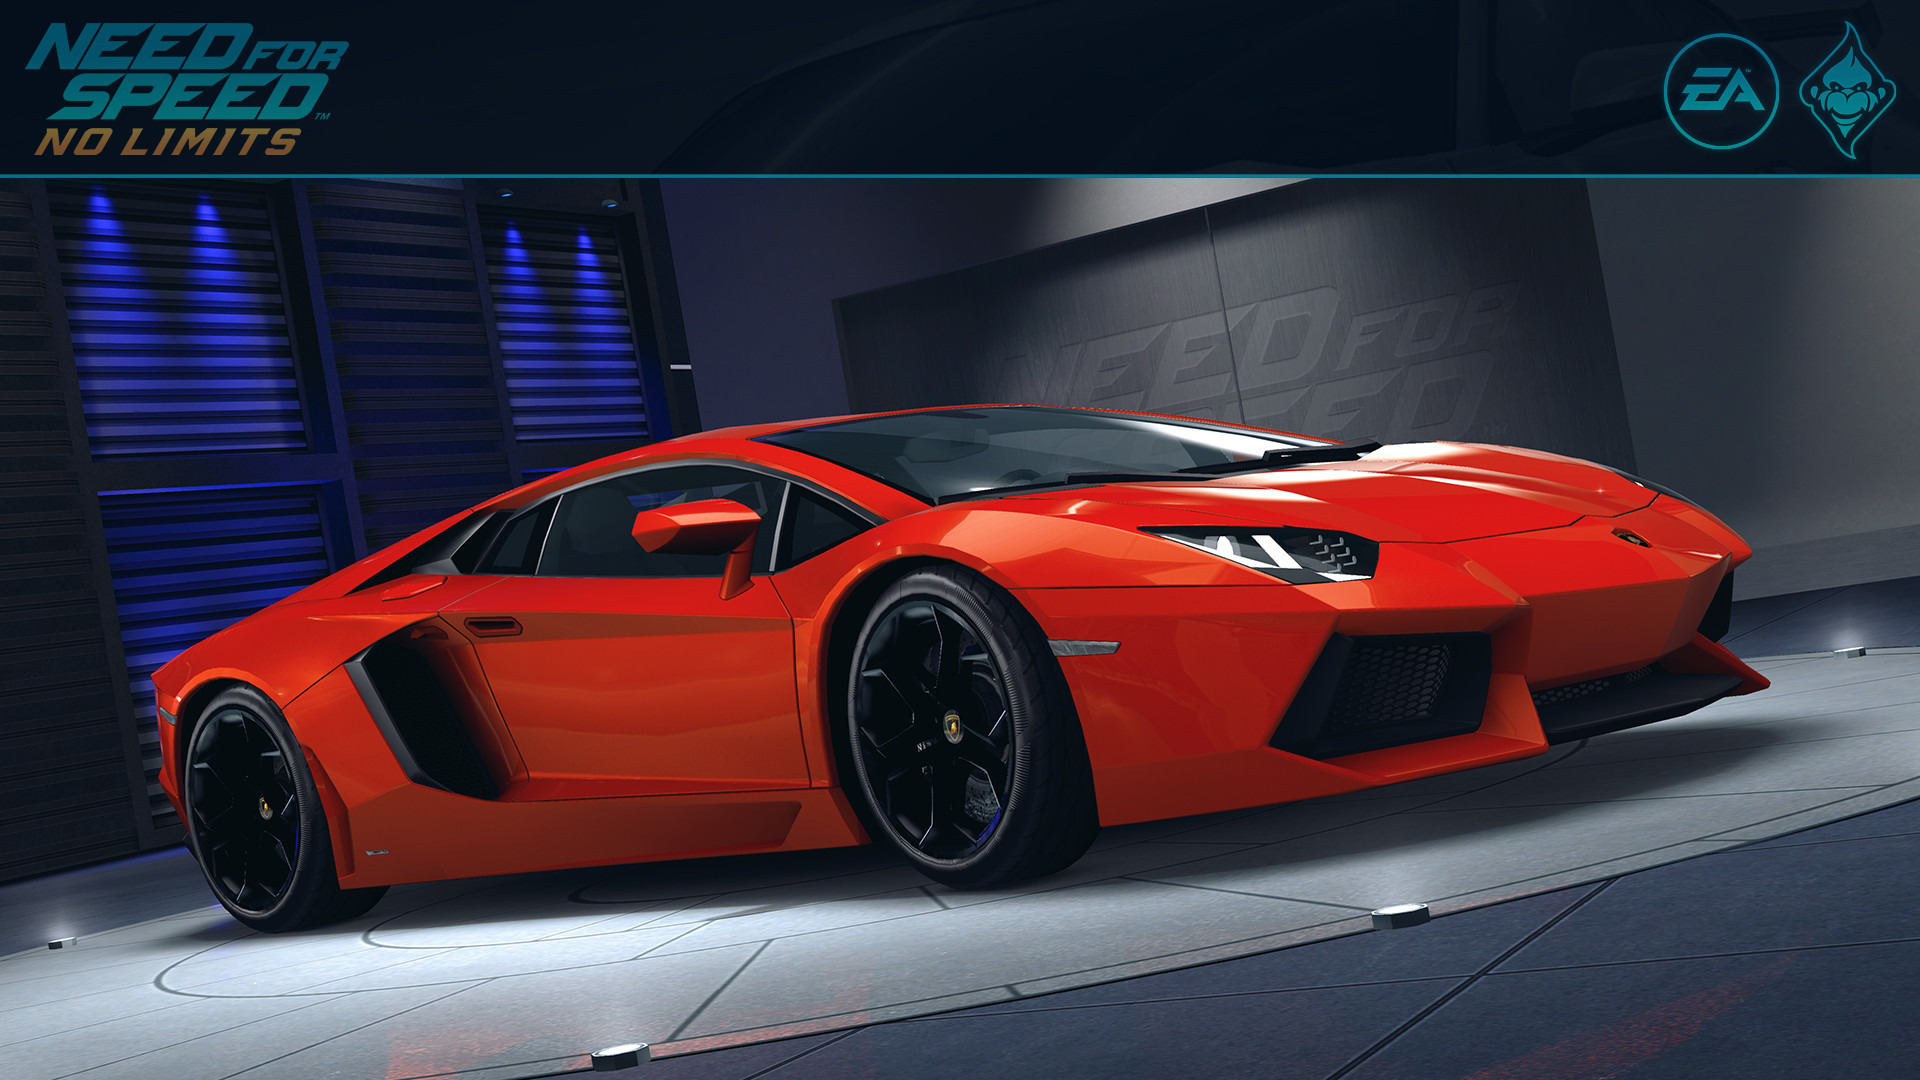 Need for Speed: No Limits, Video games, Car, Vehicle, Lamborghini Aventador, Need for Speed Wallpaper